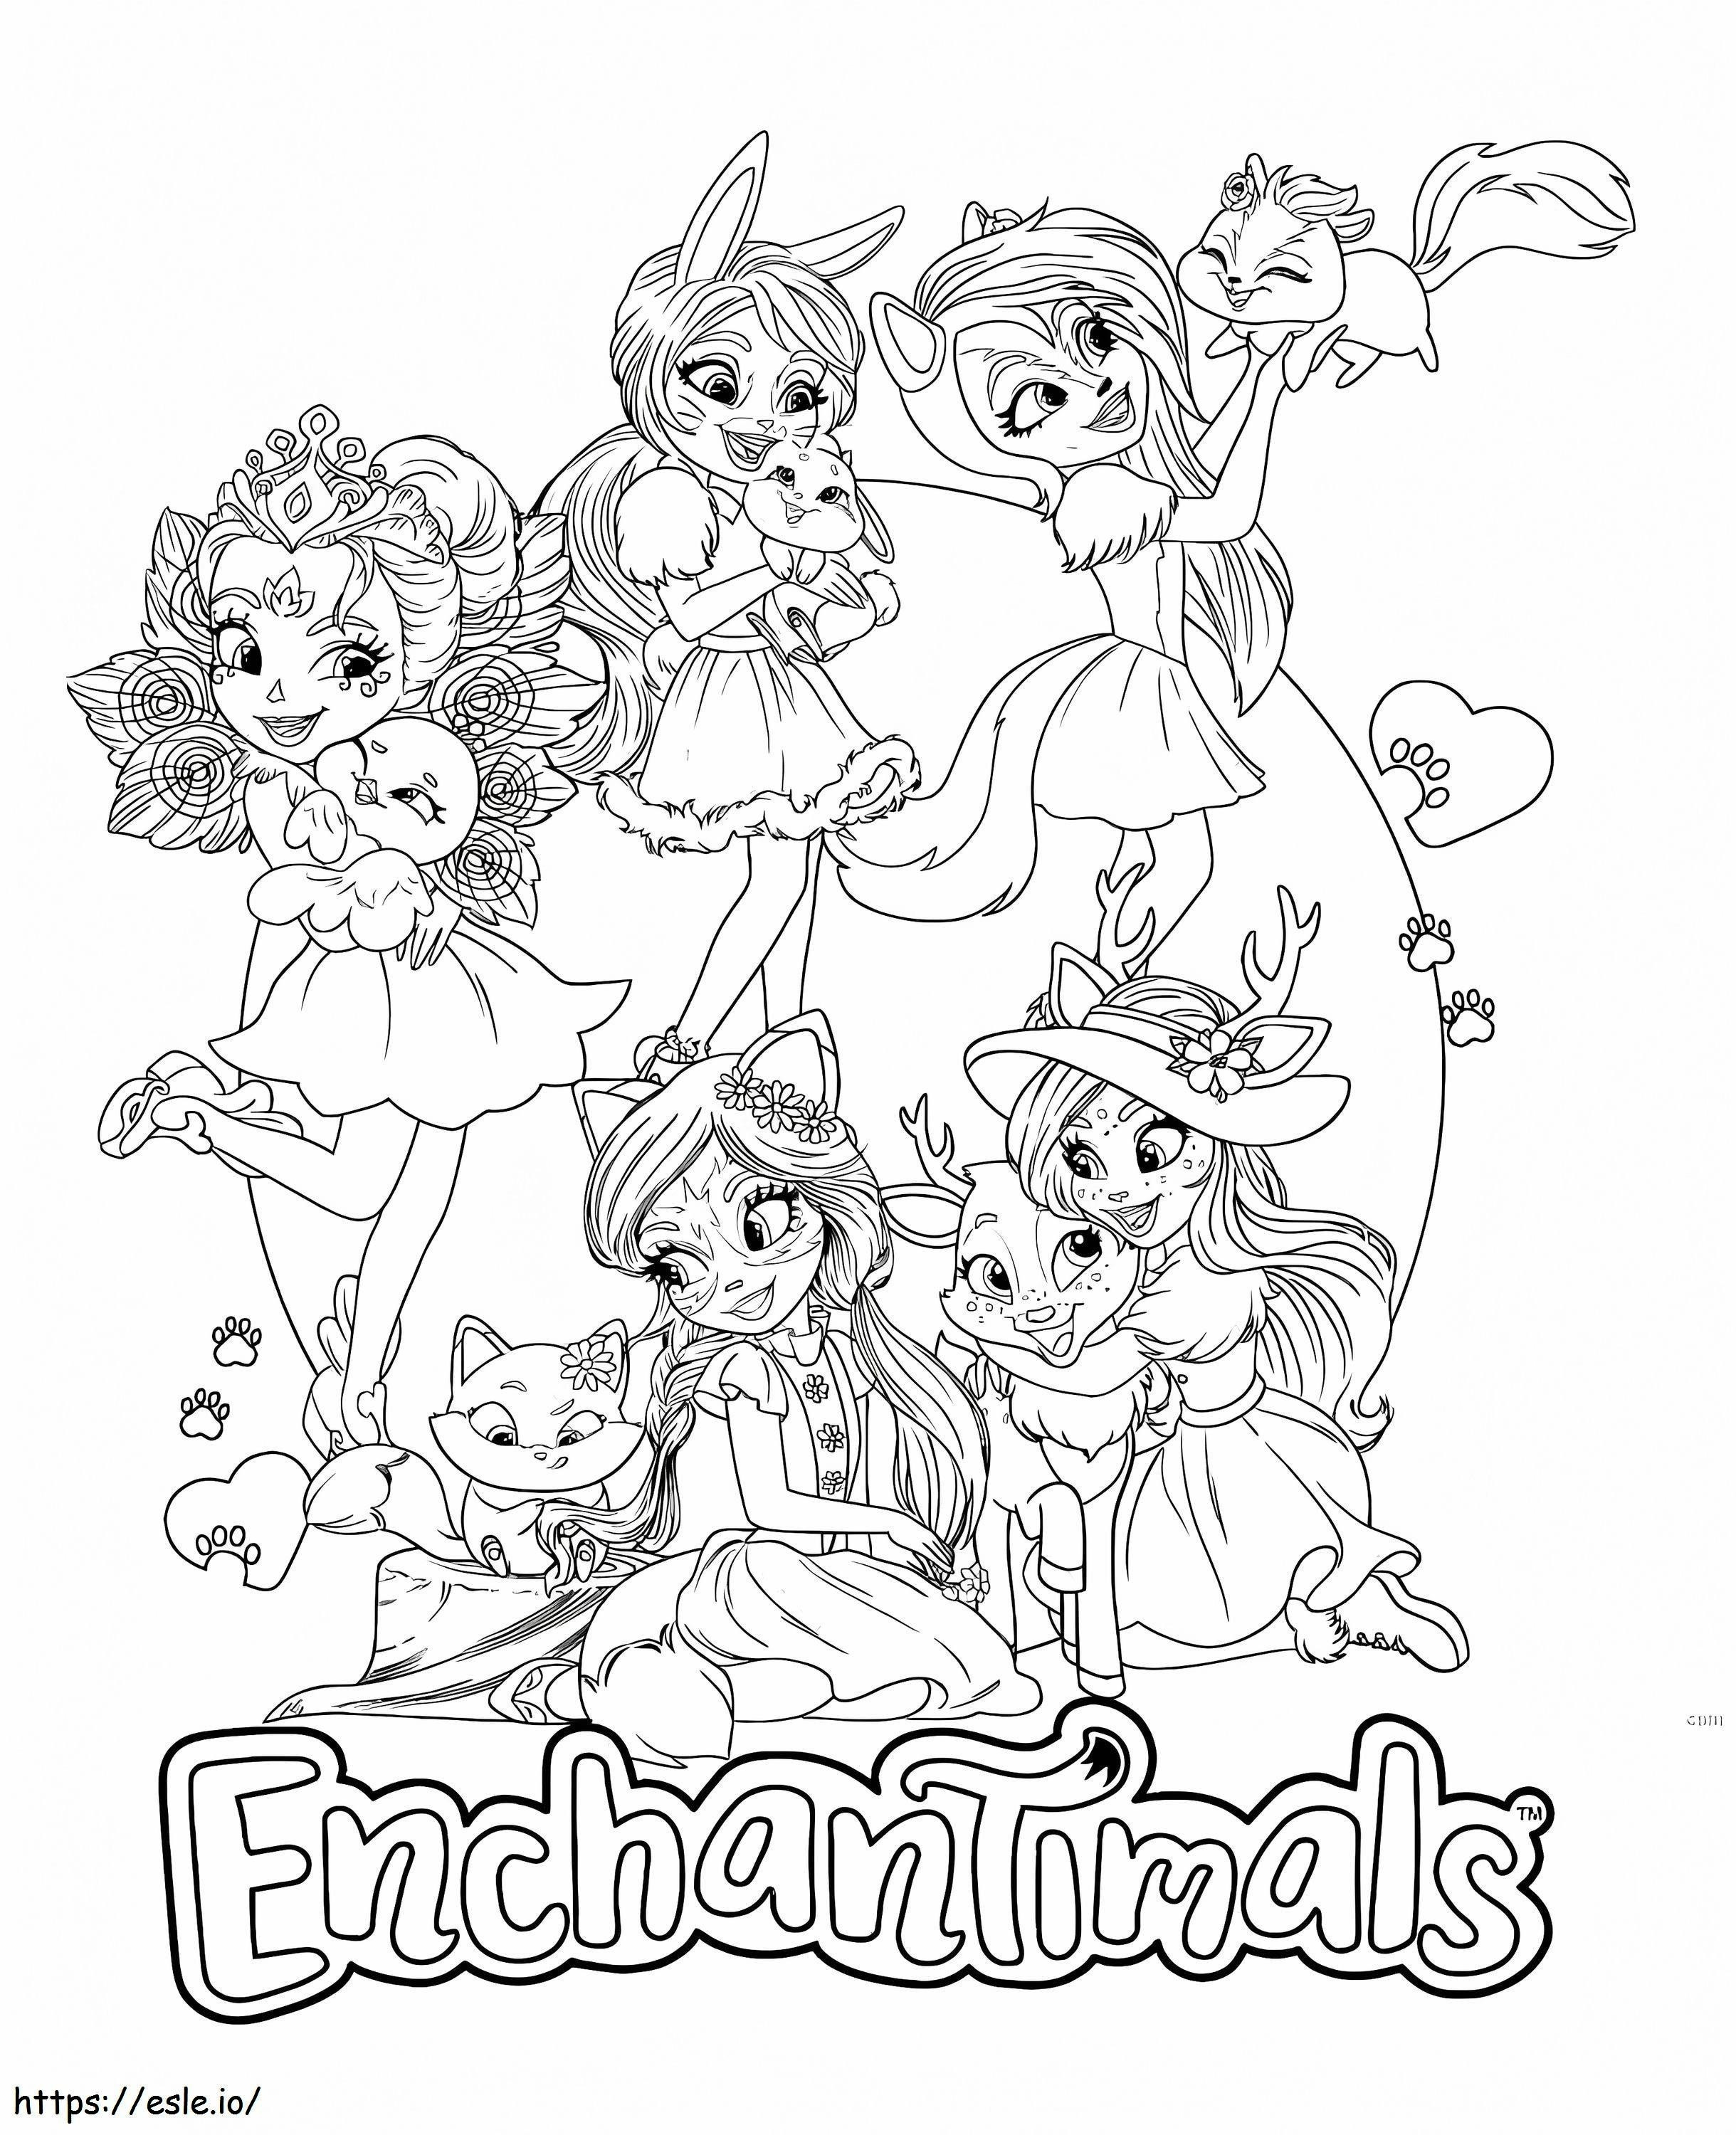 Characters From Enchantimals coloring page